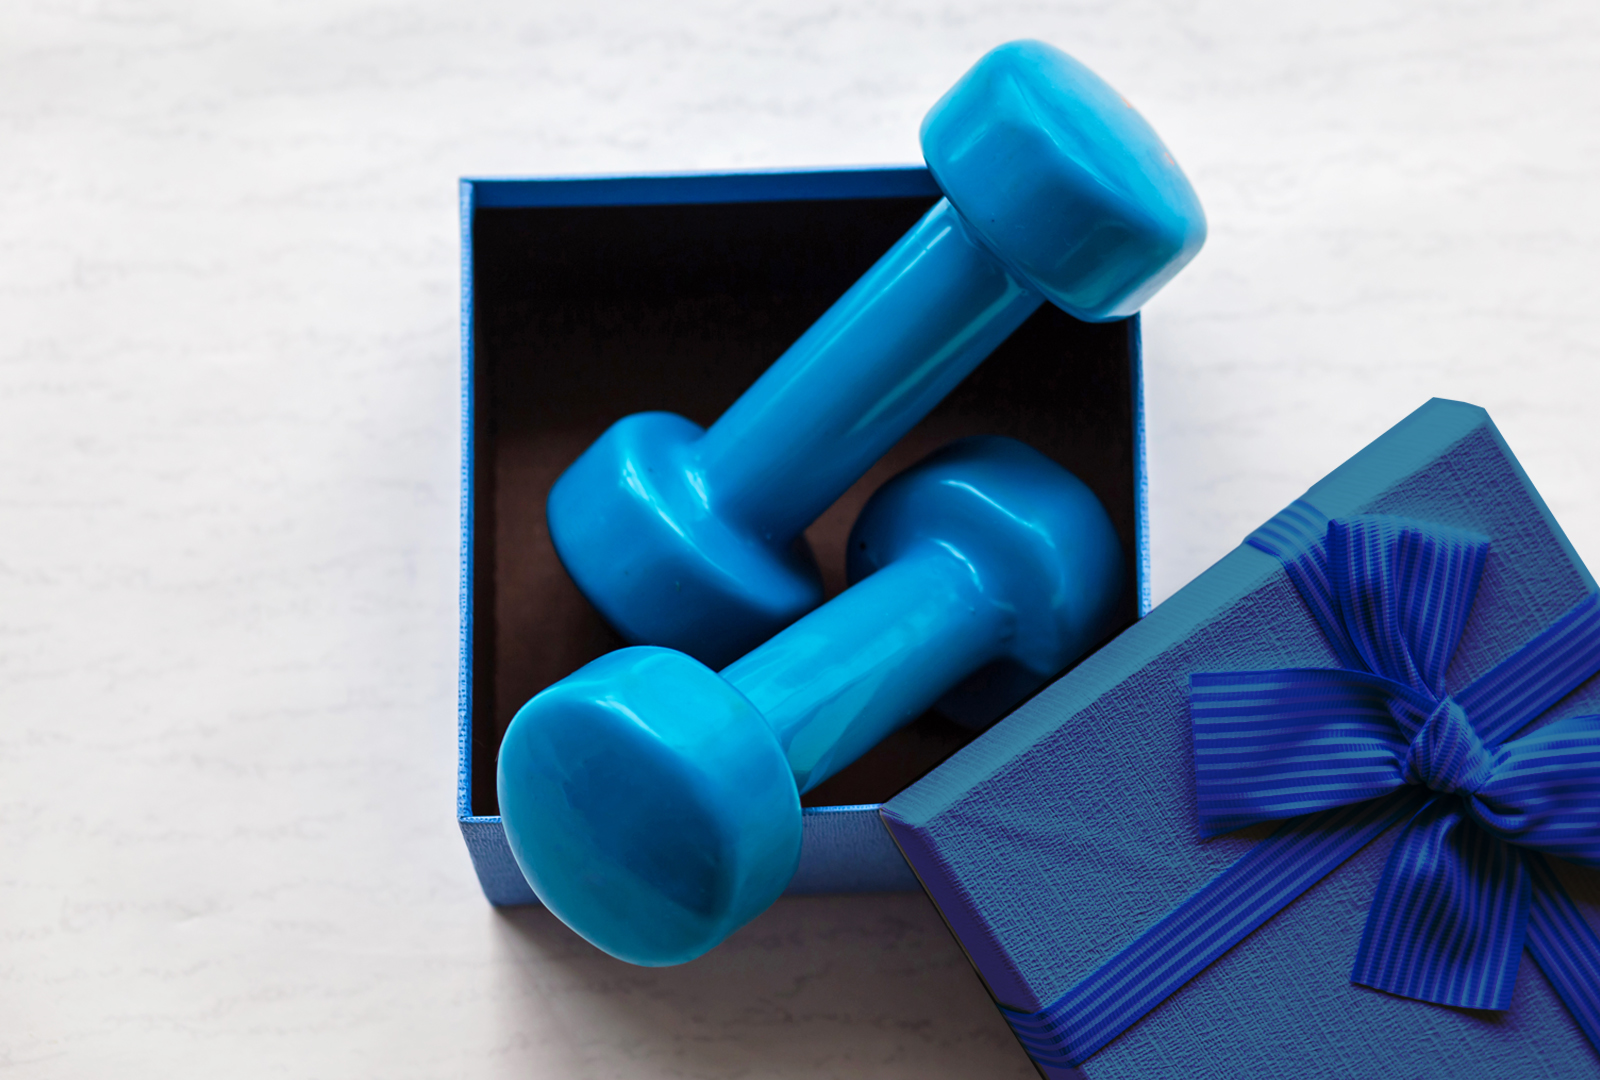 hand weights in gift box